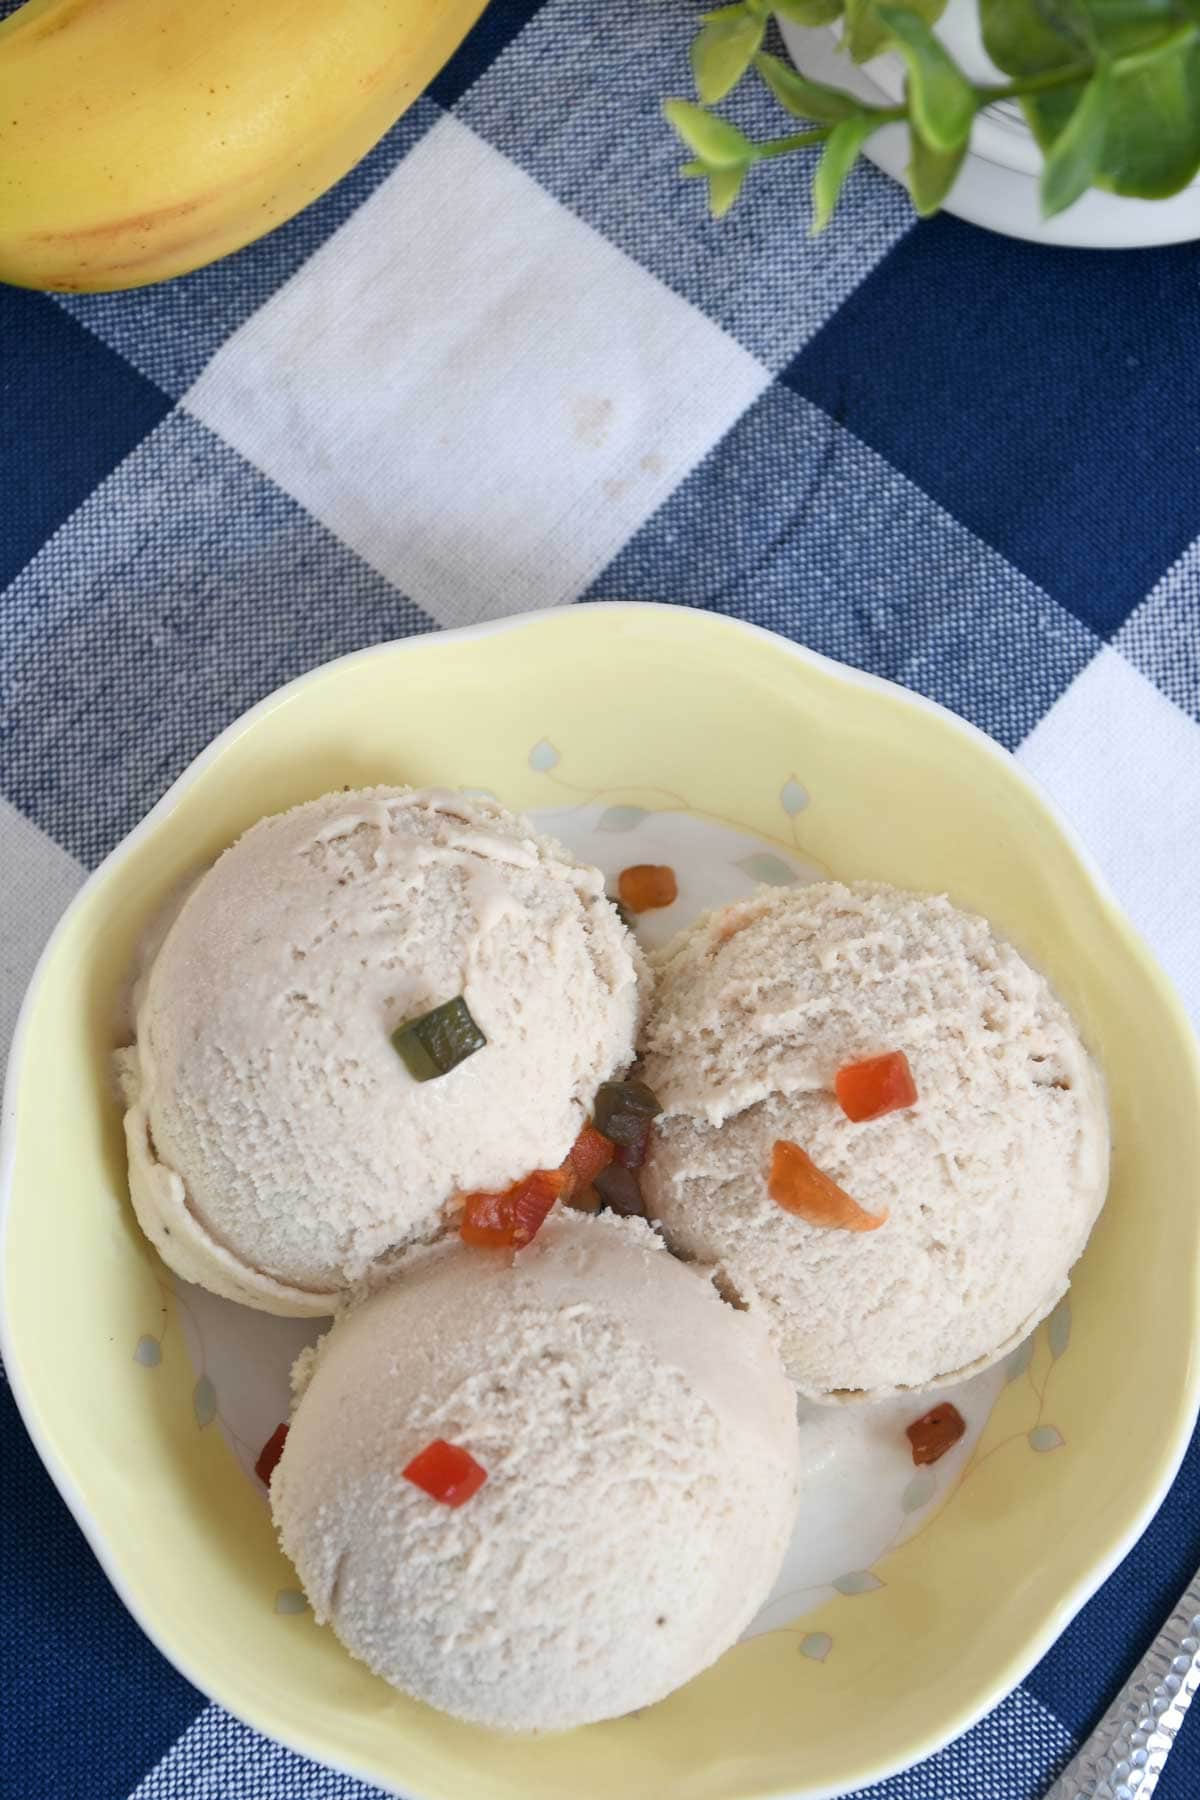 banana ice cream scoops in a bowl.